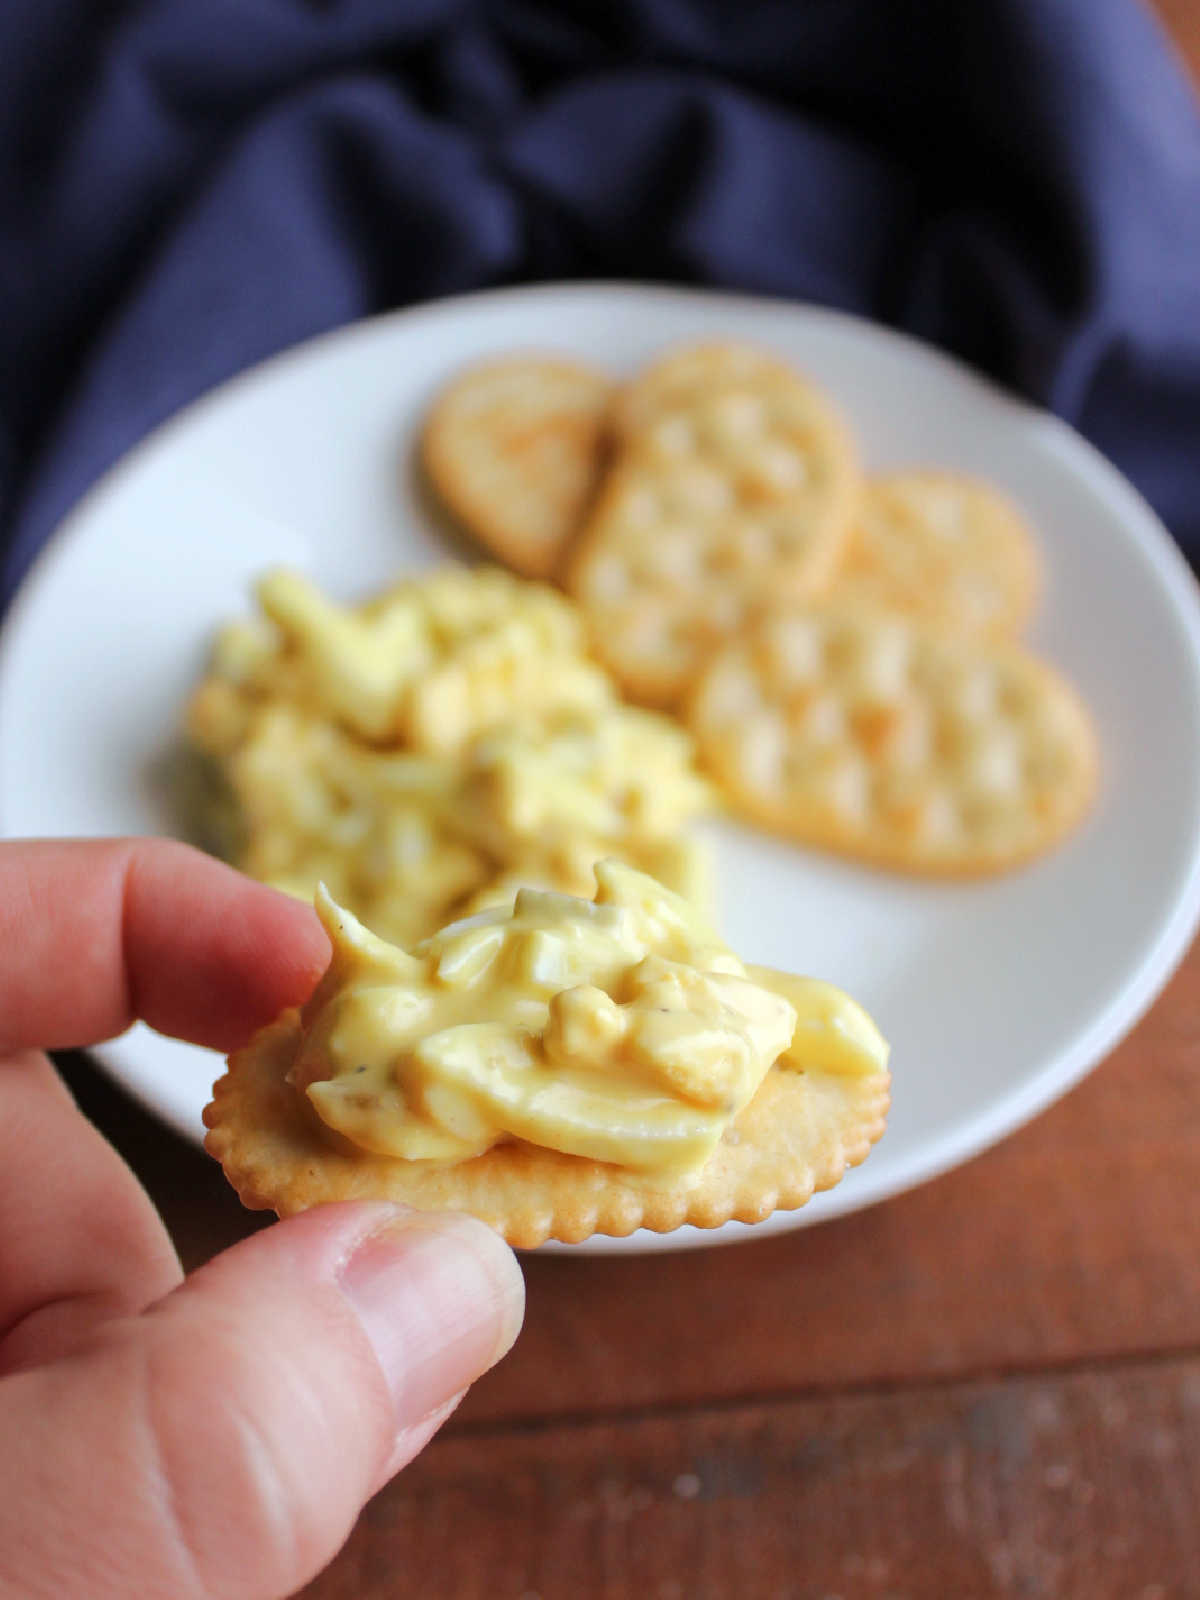 Hand holding a cracker topped with homemade egg salad.